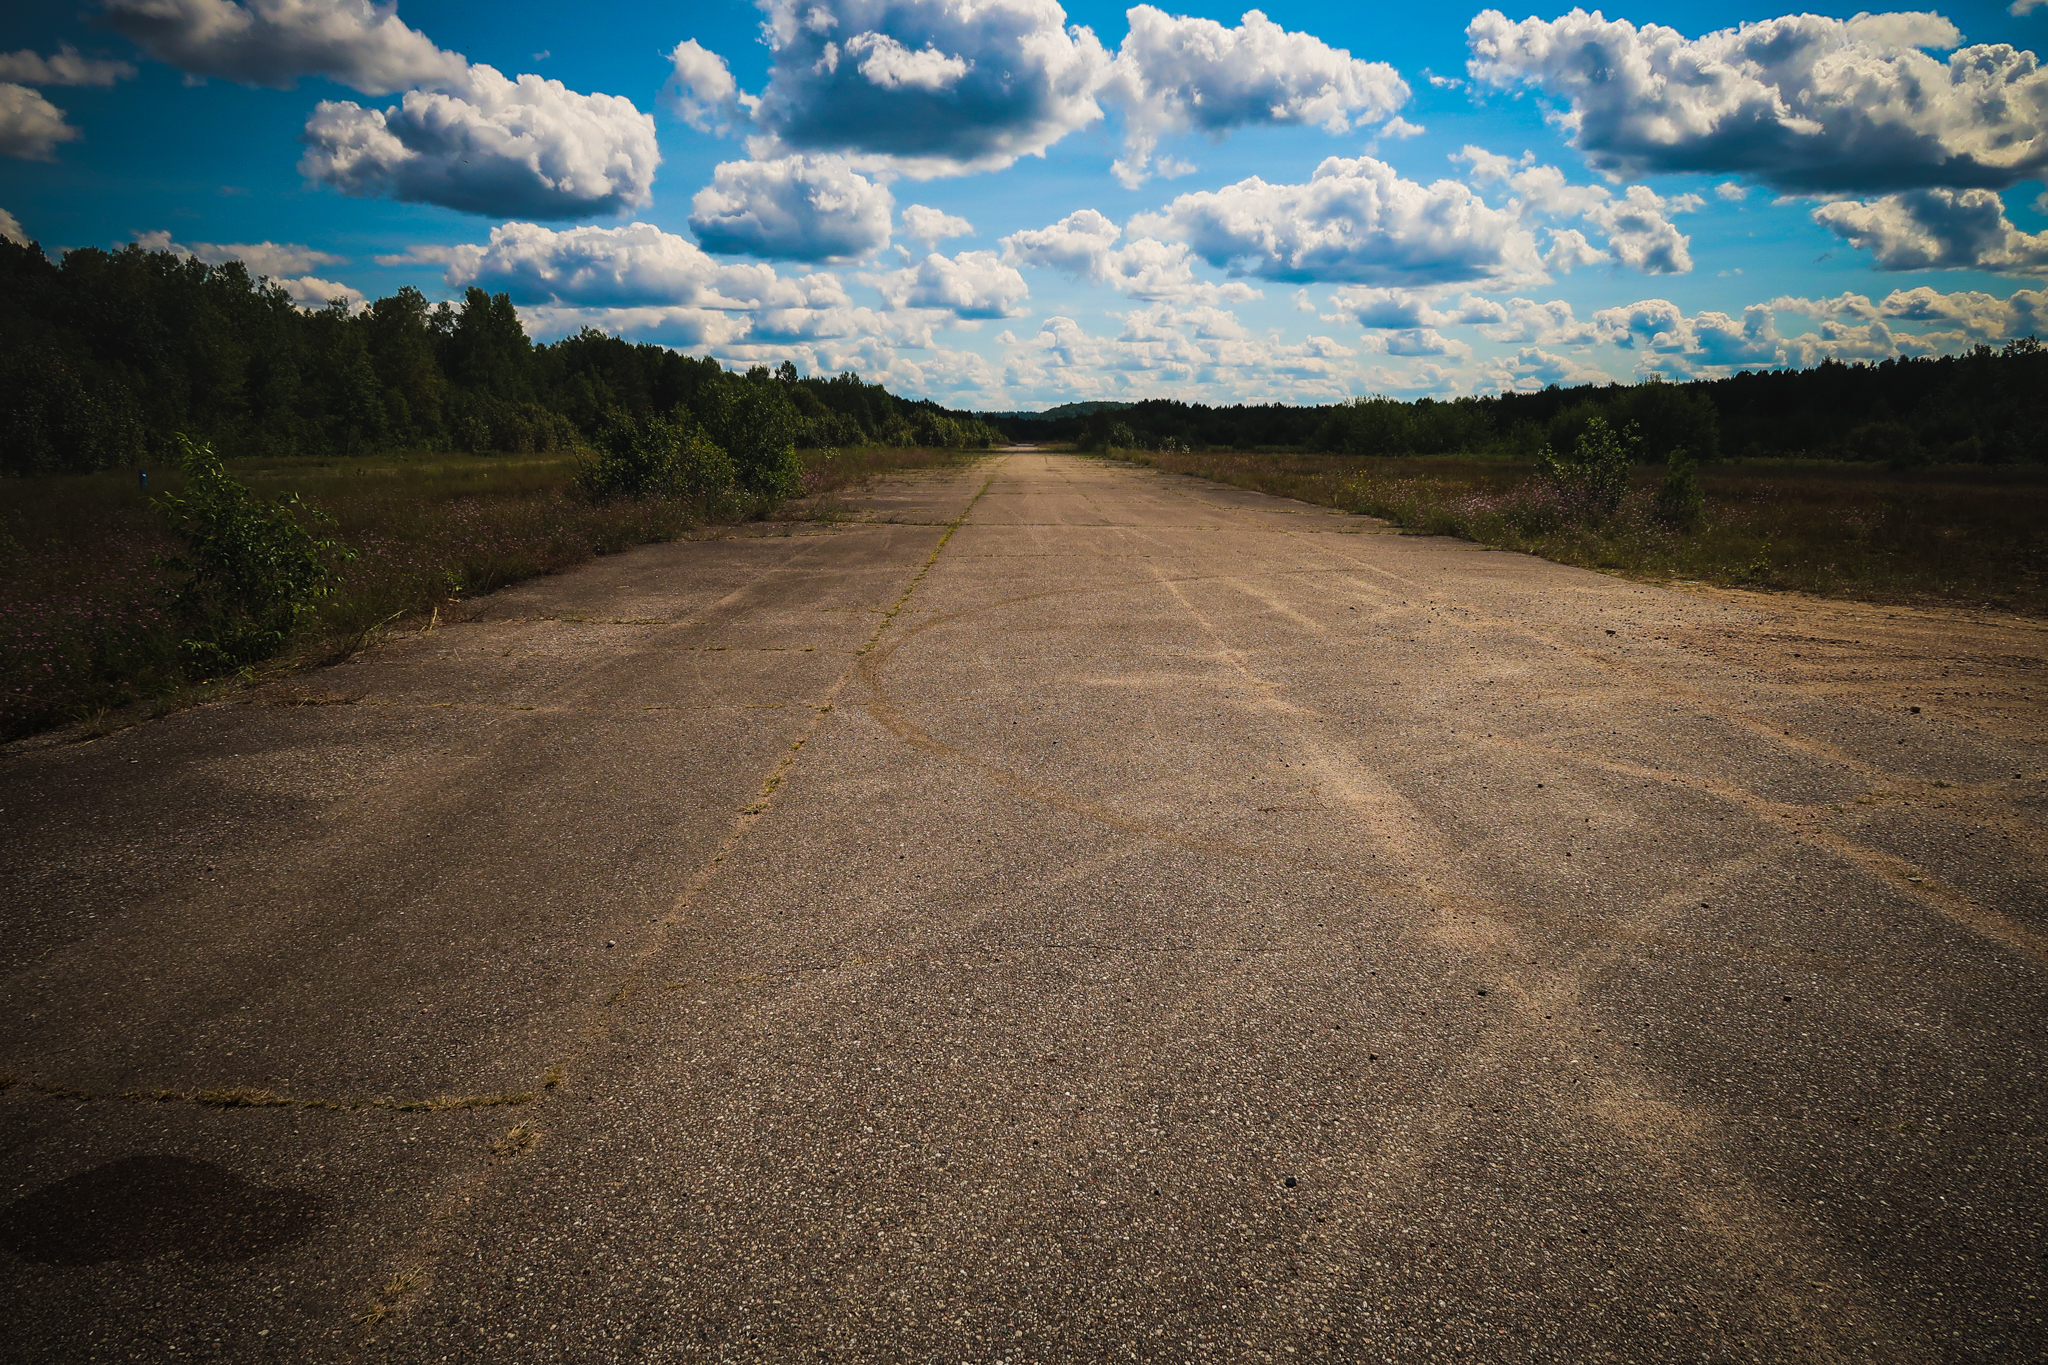  An abandoned government airstrip in the middle of the woods. 